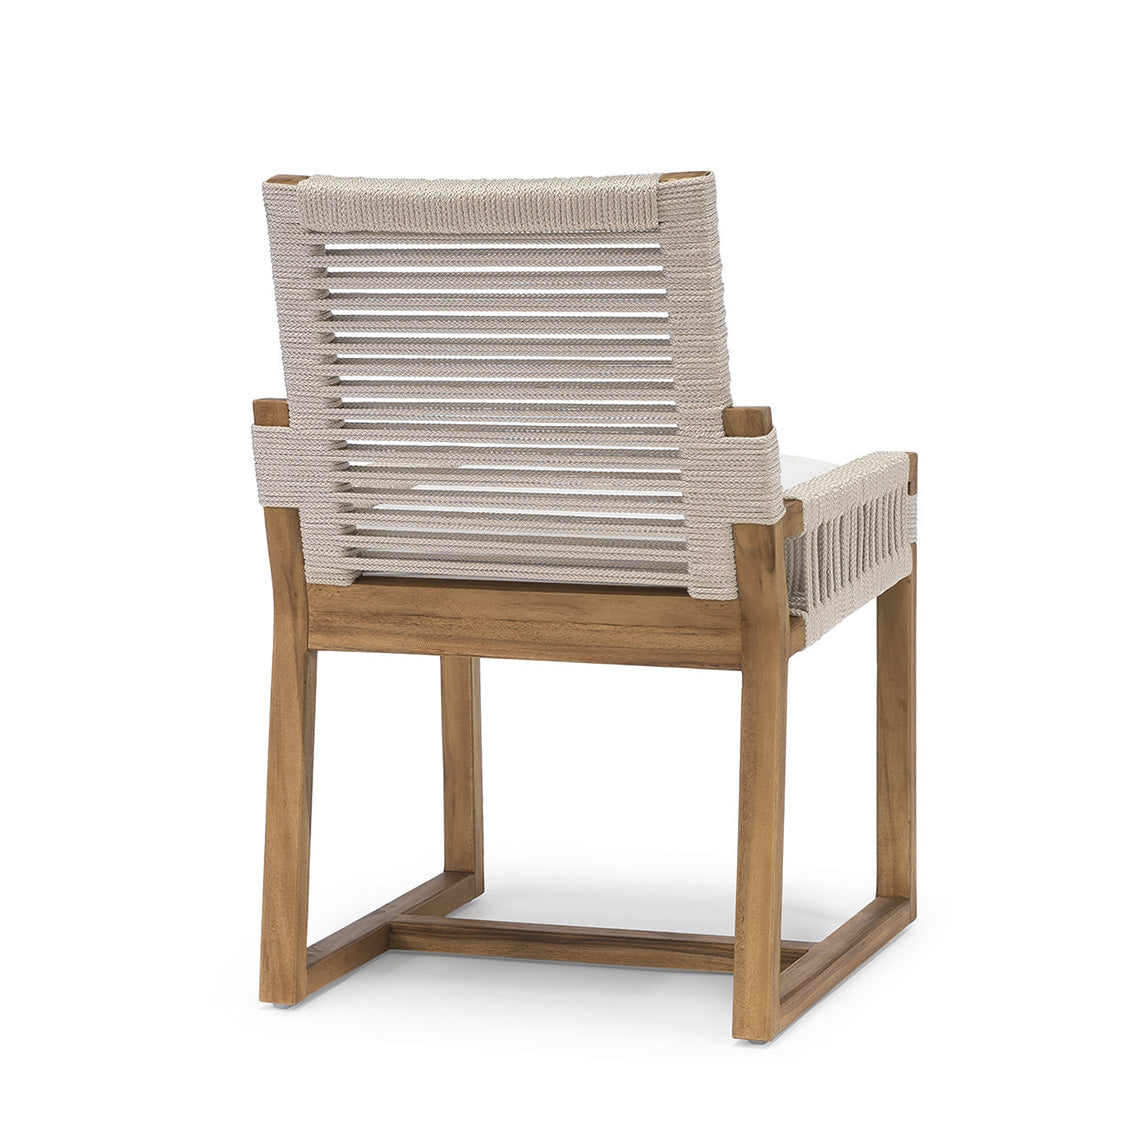 San Martin Outdoor Side Chair Taupe